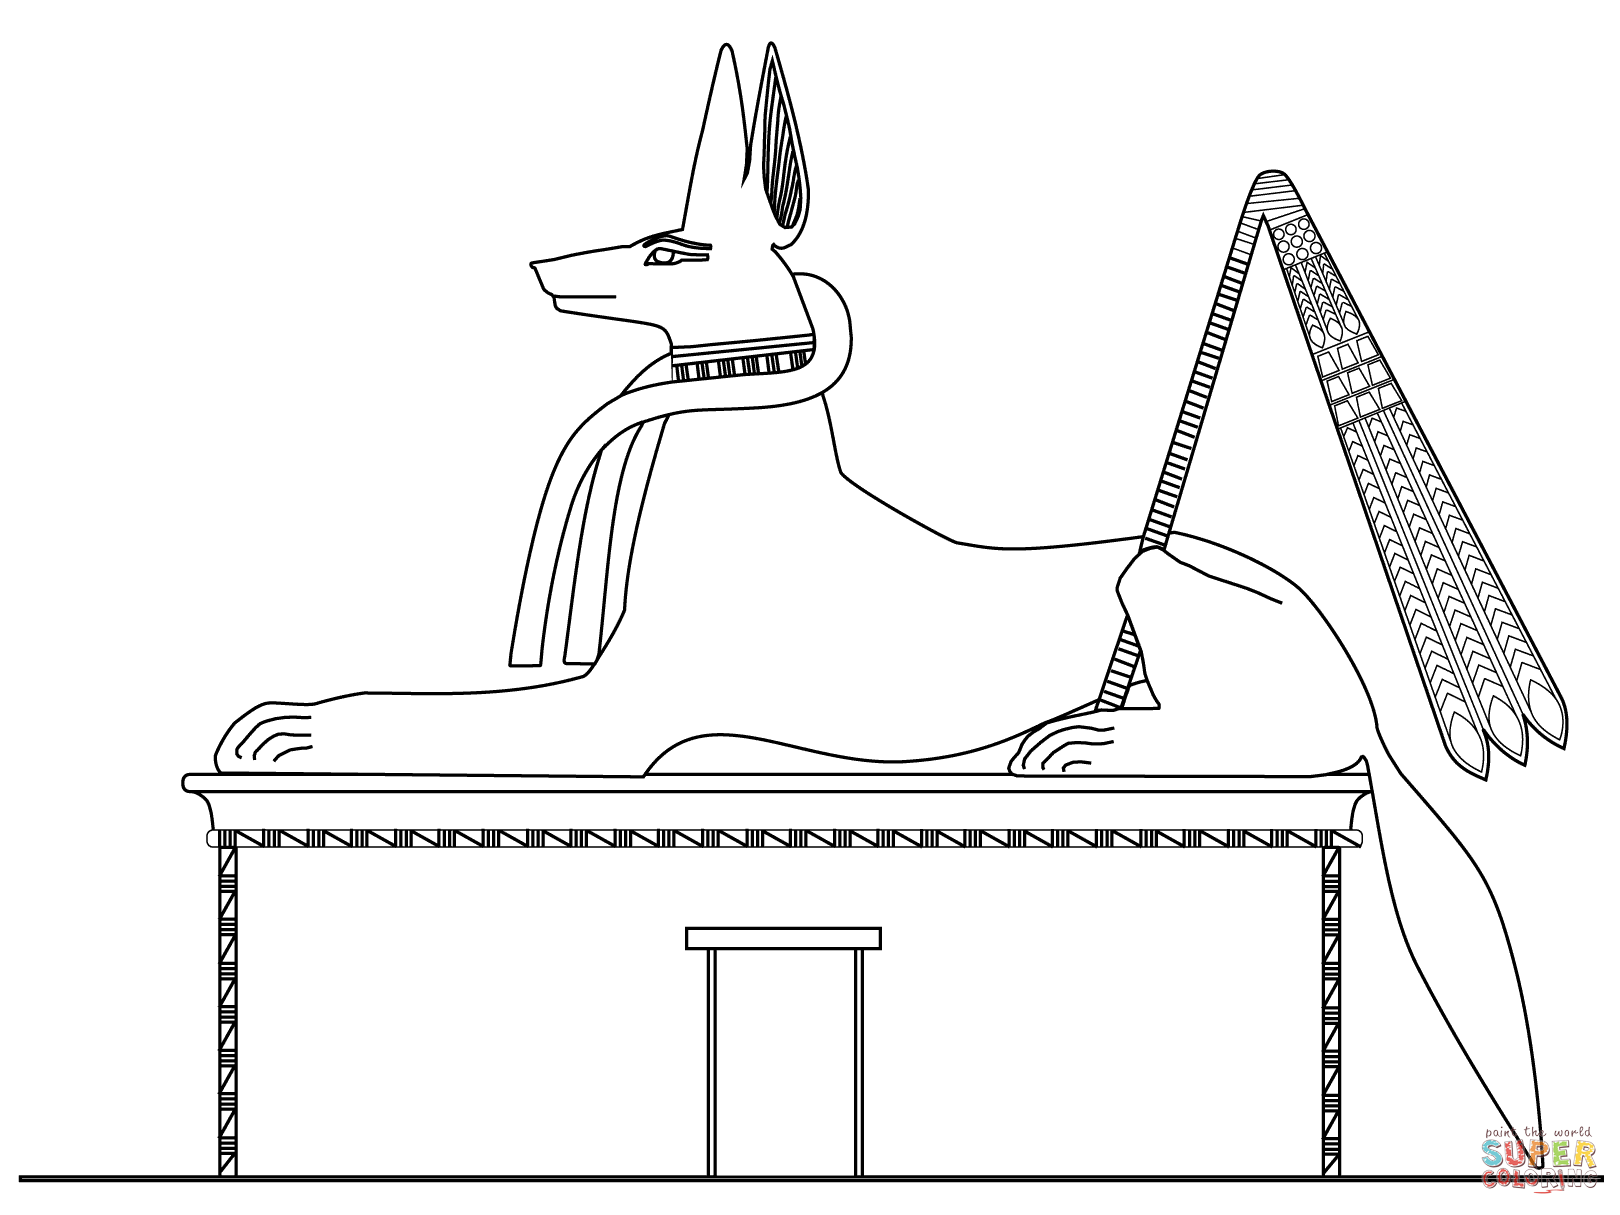 Anubis as a black-coated jackal coloring page | Free ...